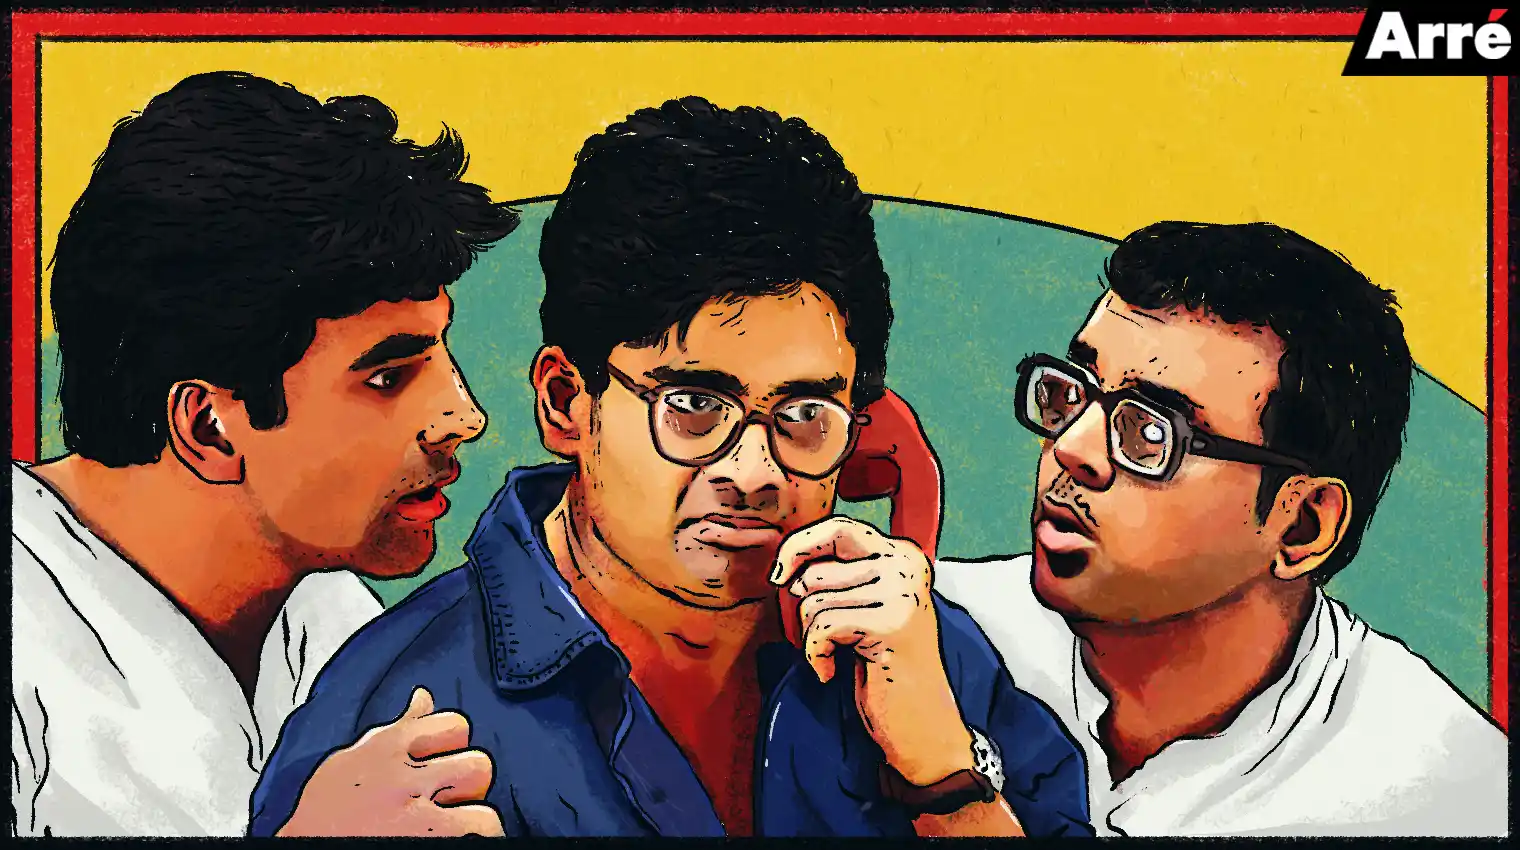 Hera Pheri: This Priyadarshan Comedy is Greatest Uplifter of All Time